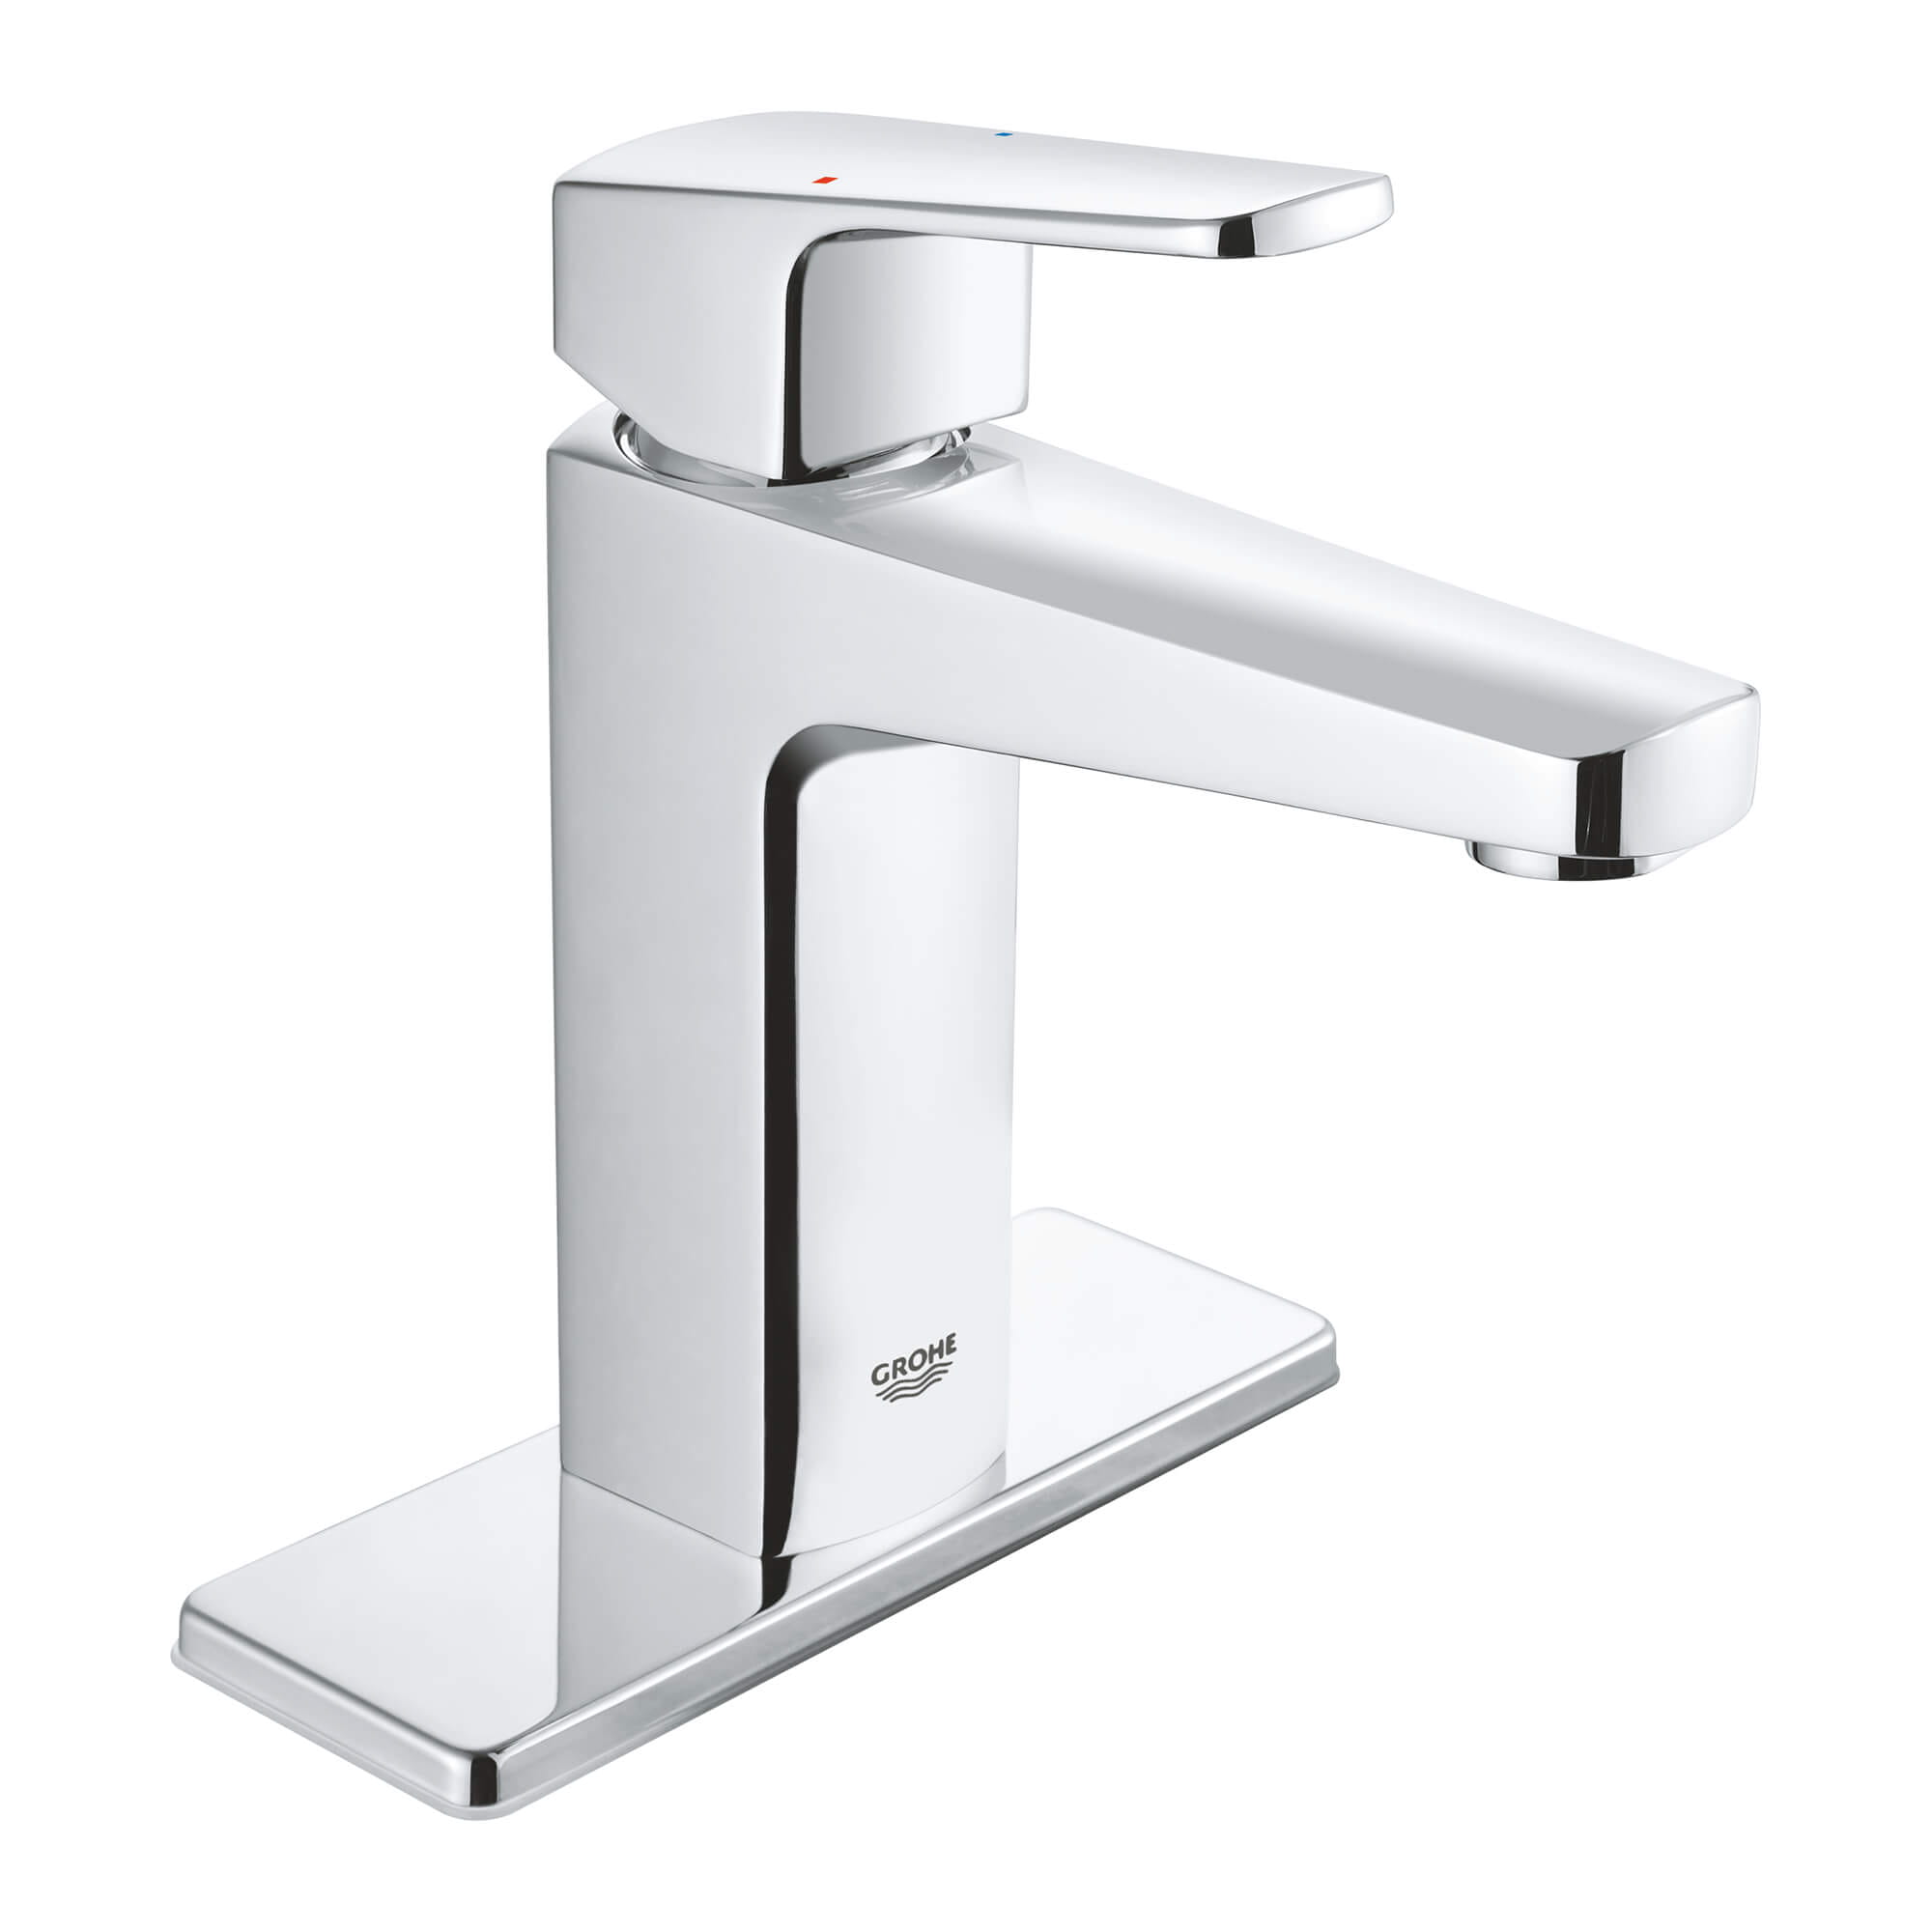 GROHE Euroeco Special Lavatory Centerset for sale online 